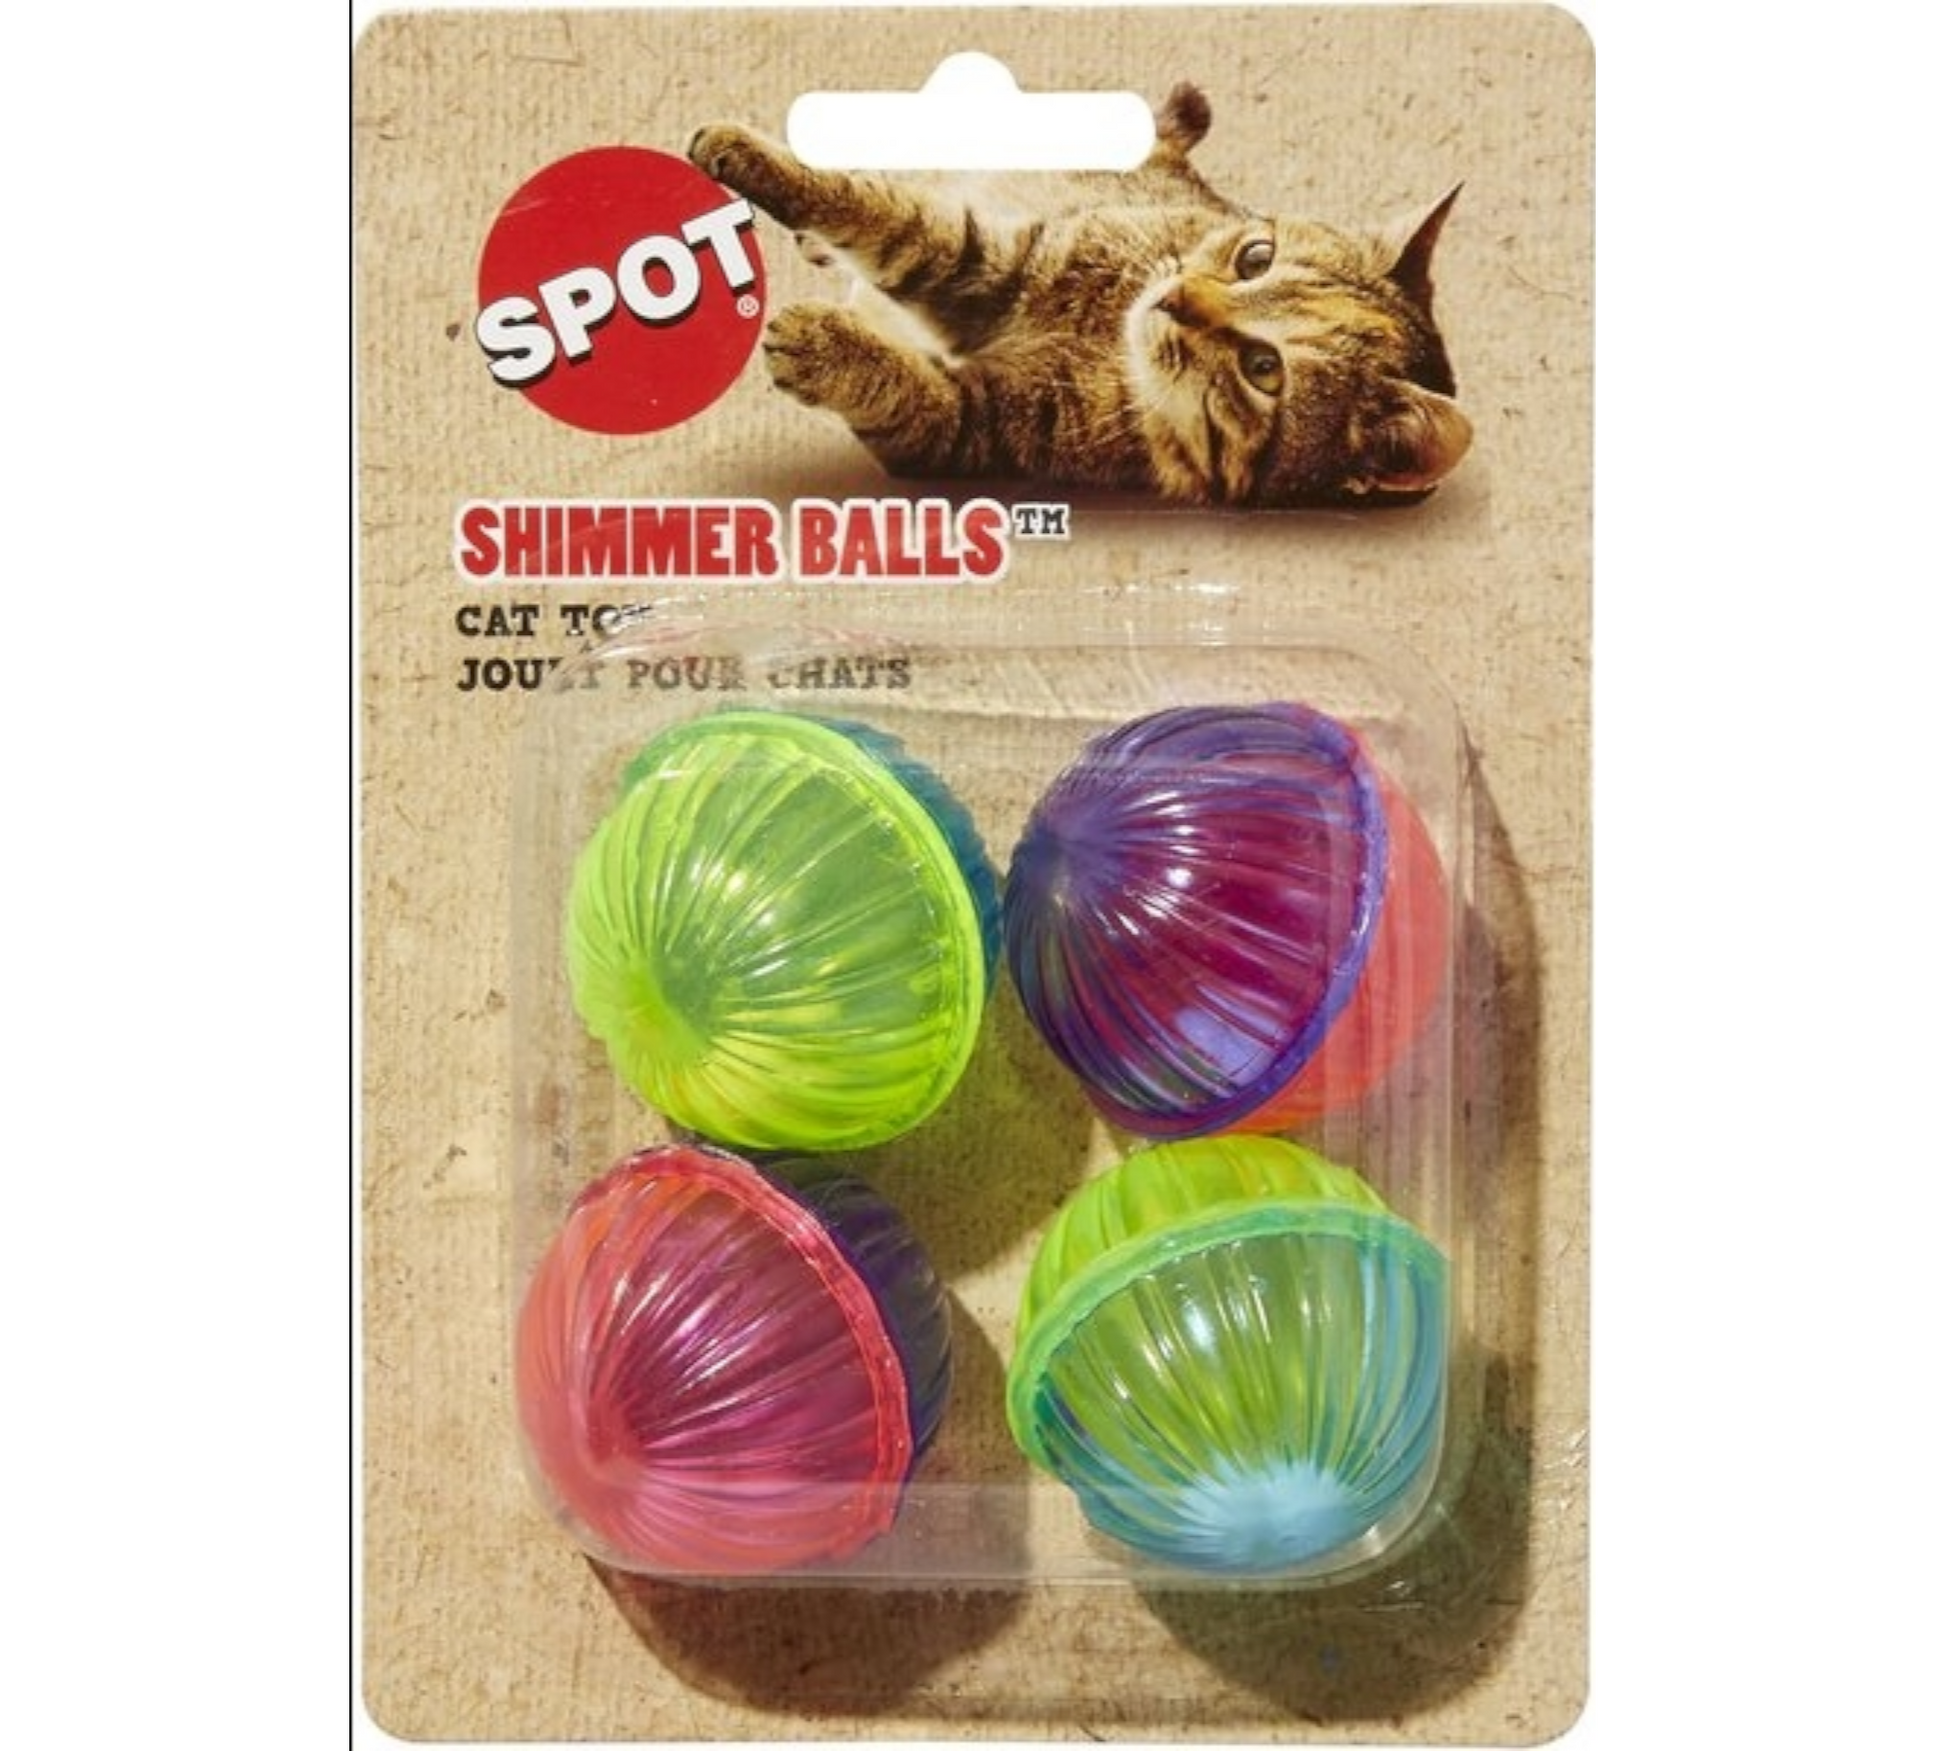 Canine's World Cat Balls & Chasers Spot Pet Shimmer Balls Cat Toy, 4-pack Spot